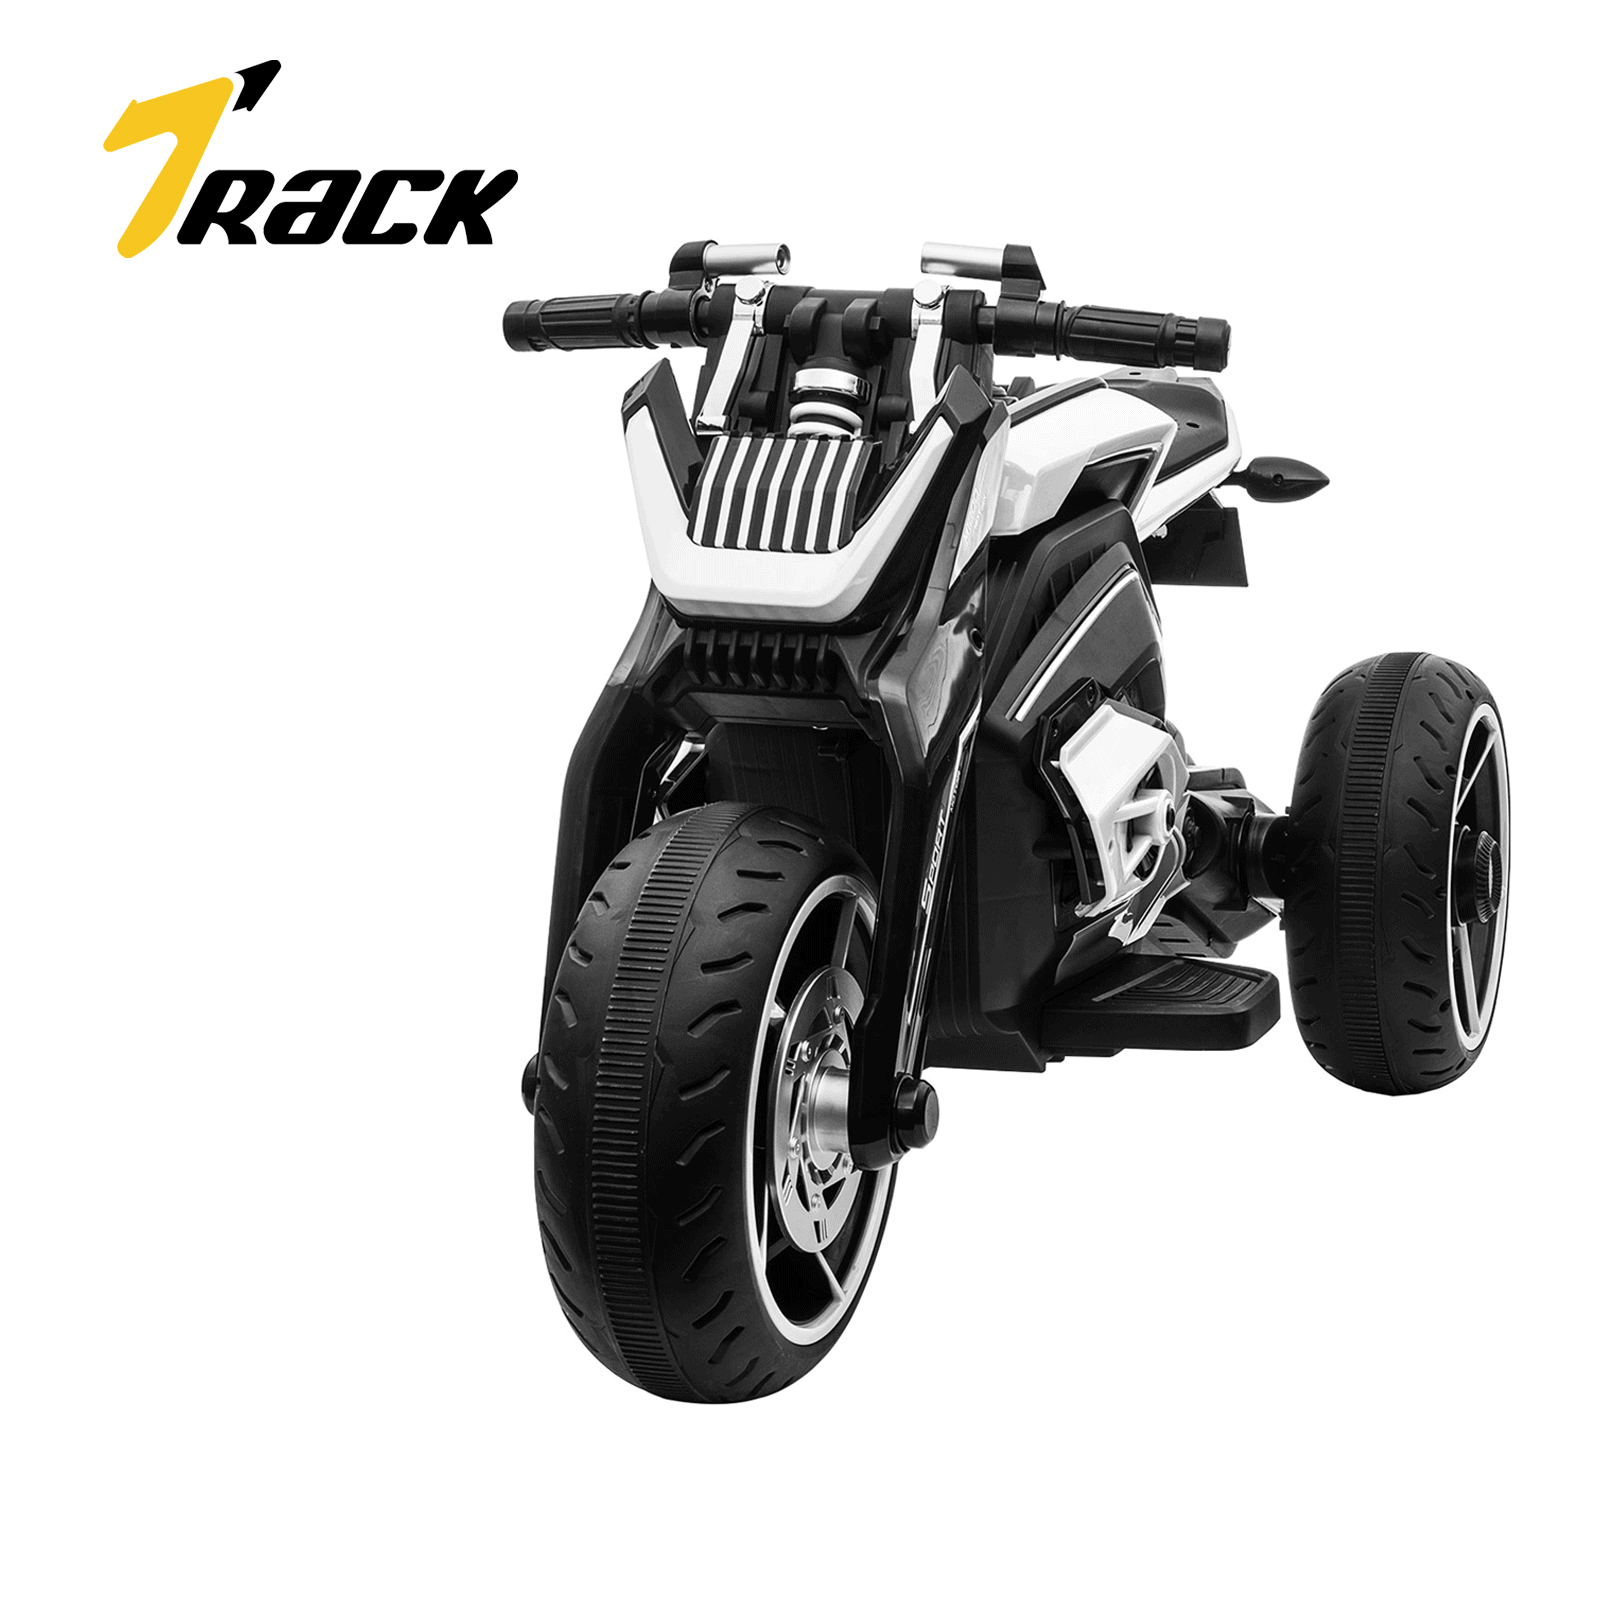 Track Seven 12V Kids Ride on Motorcycle,Electric Trike Motorcycle for Boys Girls,3 Wheels,White